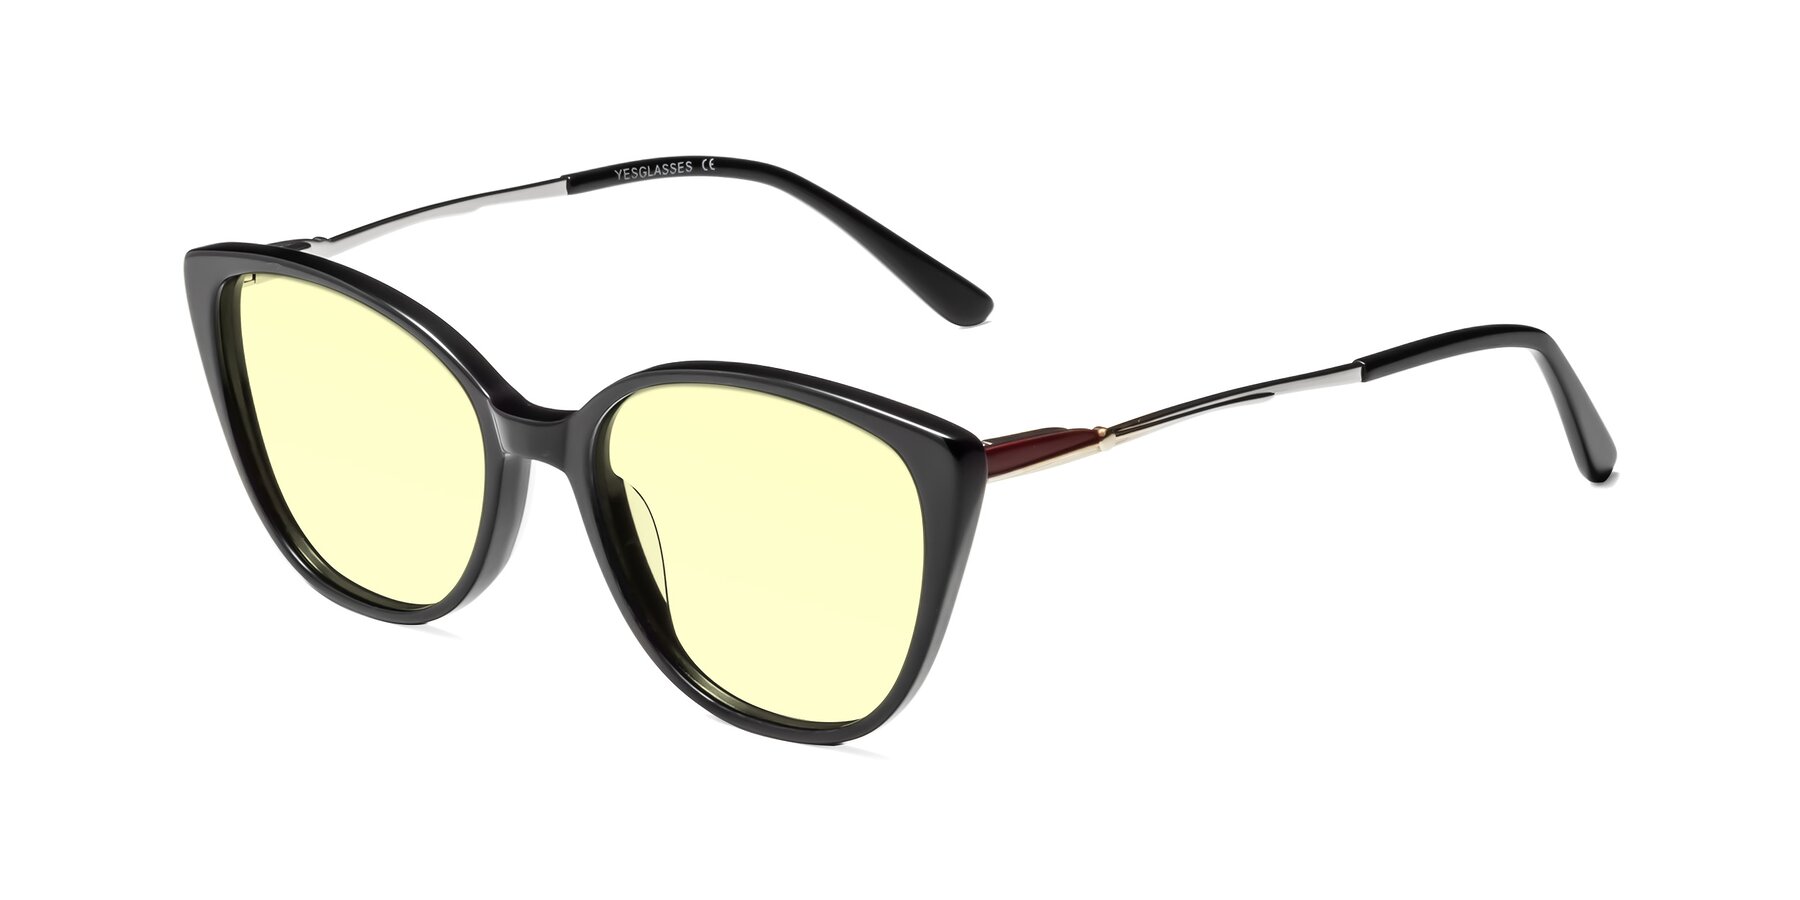 Angle of 17424 in Black with Light Yellow Tinted Lenses